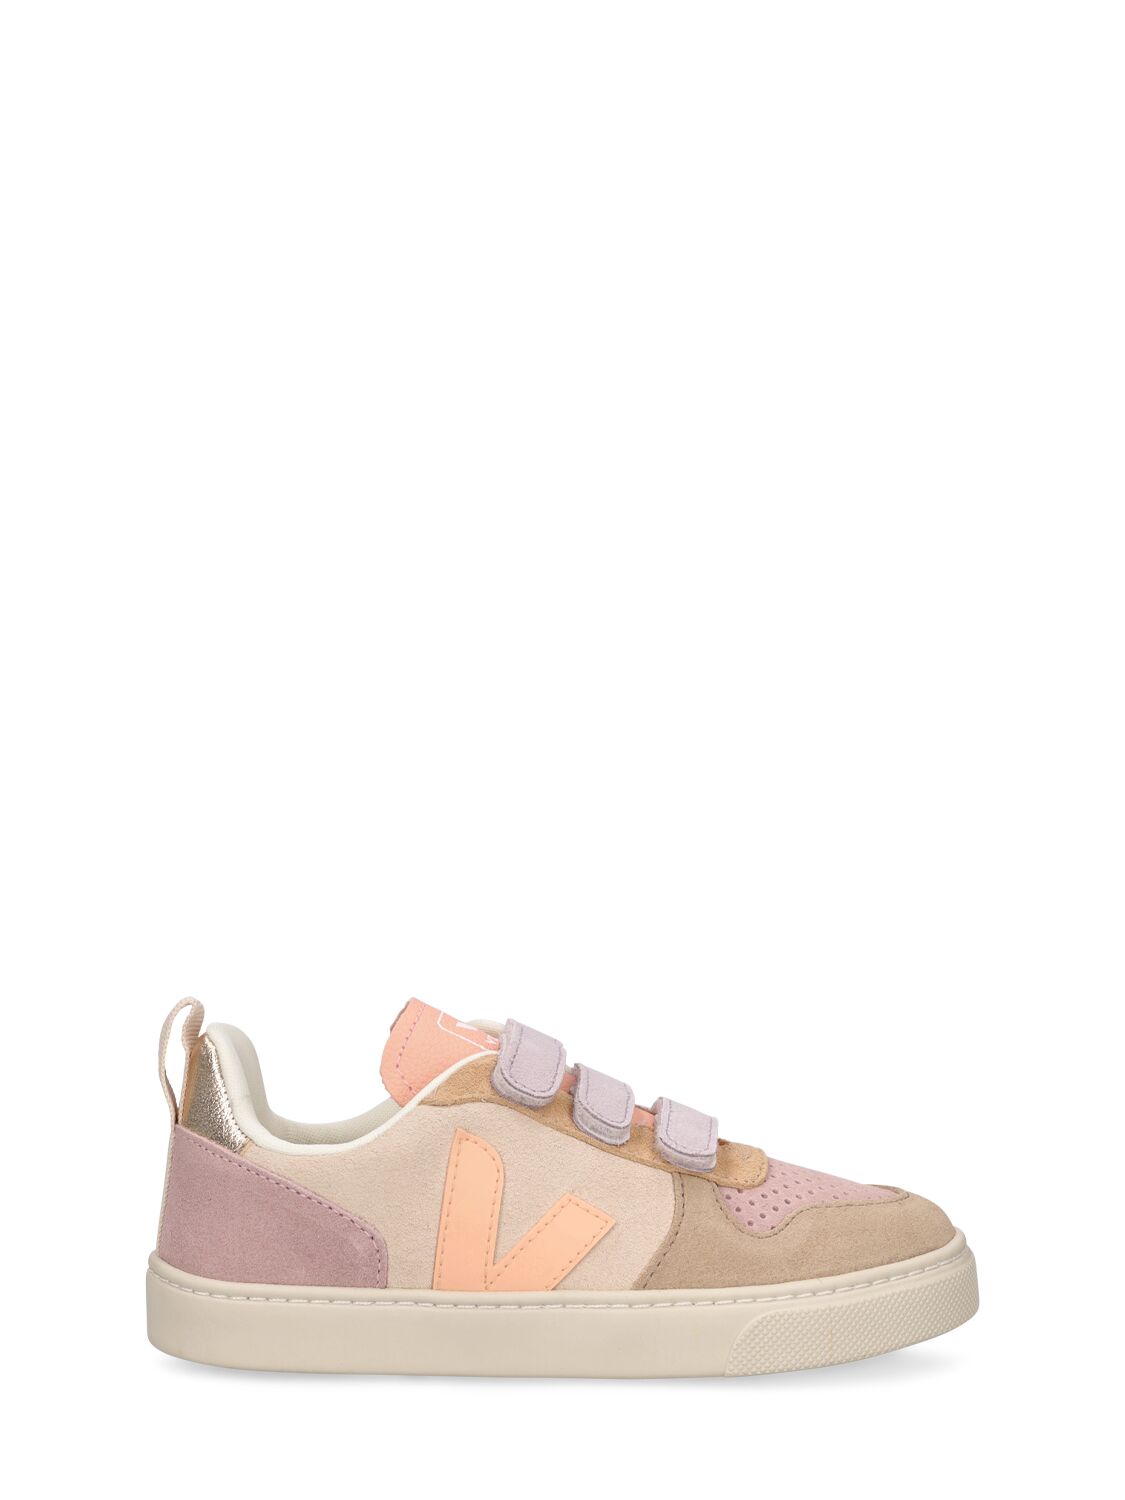 Image of V-10 Suede Strap Sneakers